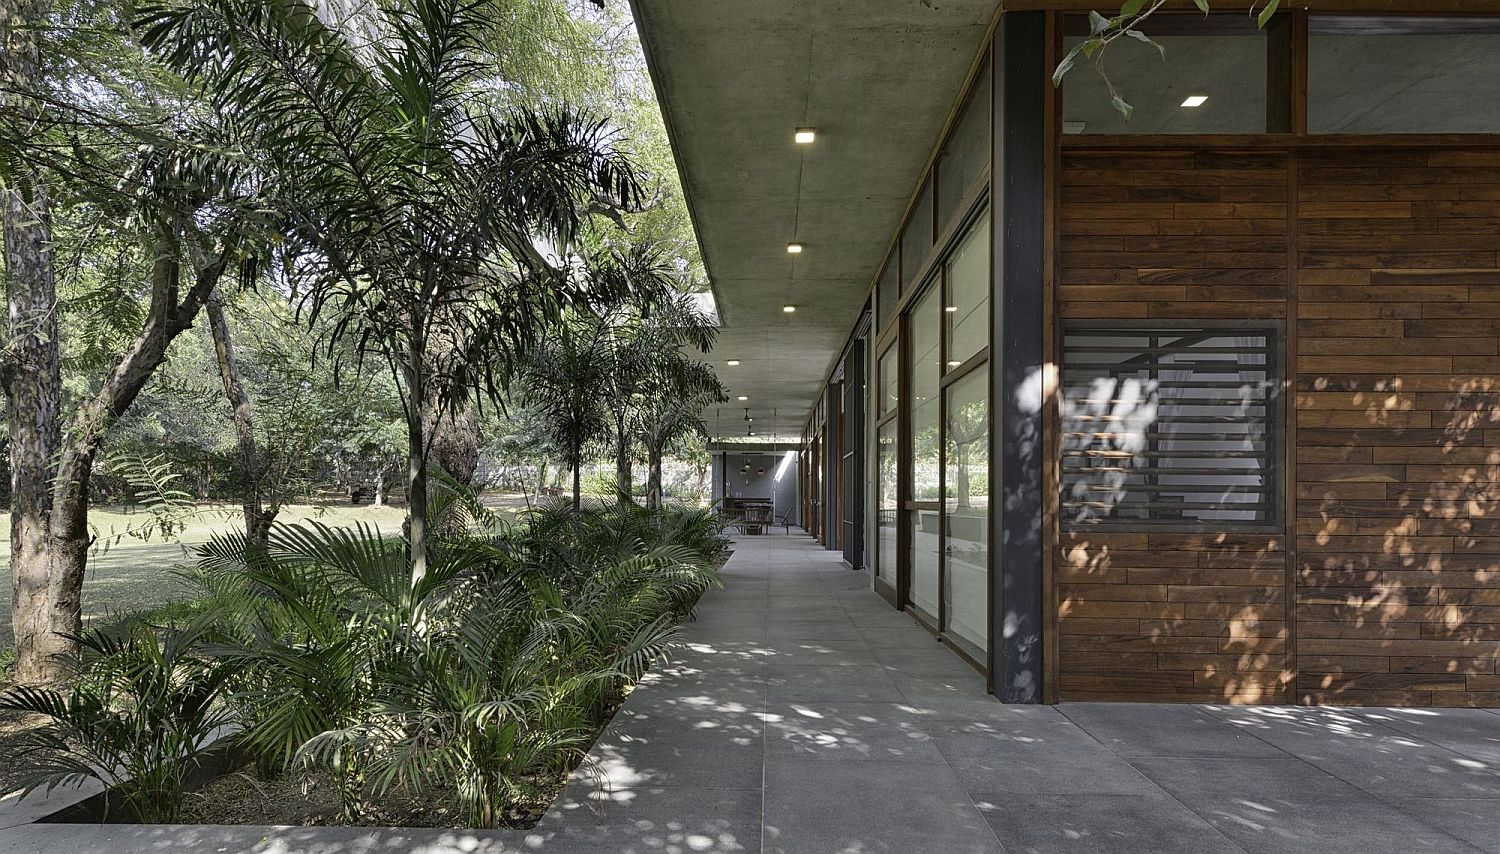 Existing-trees-and-greenery-around-the-house-have-been-carefully-integrated-into-its-design